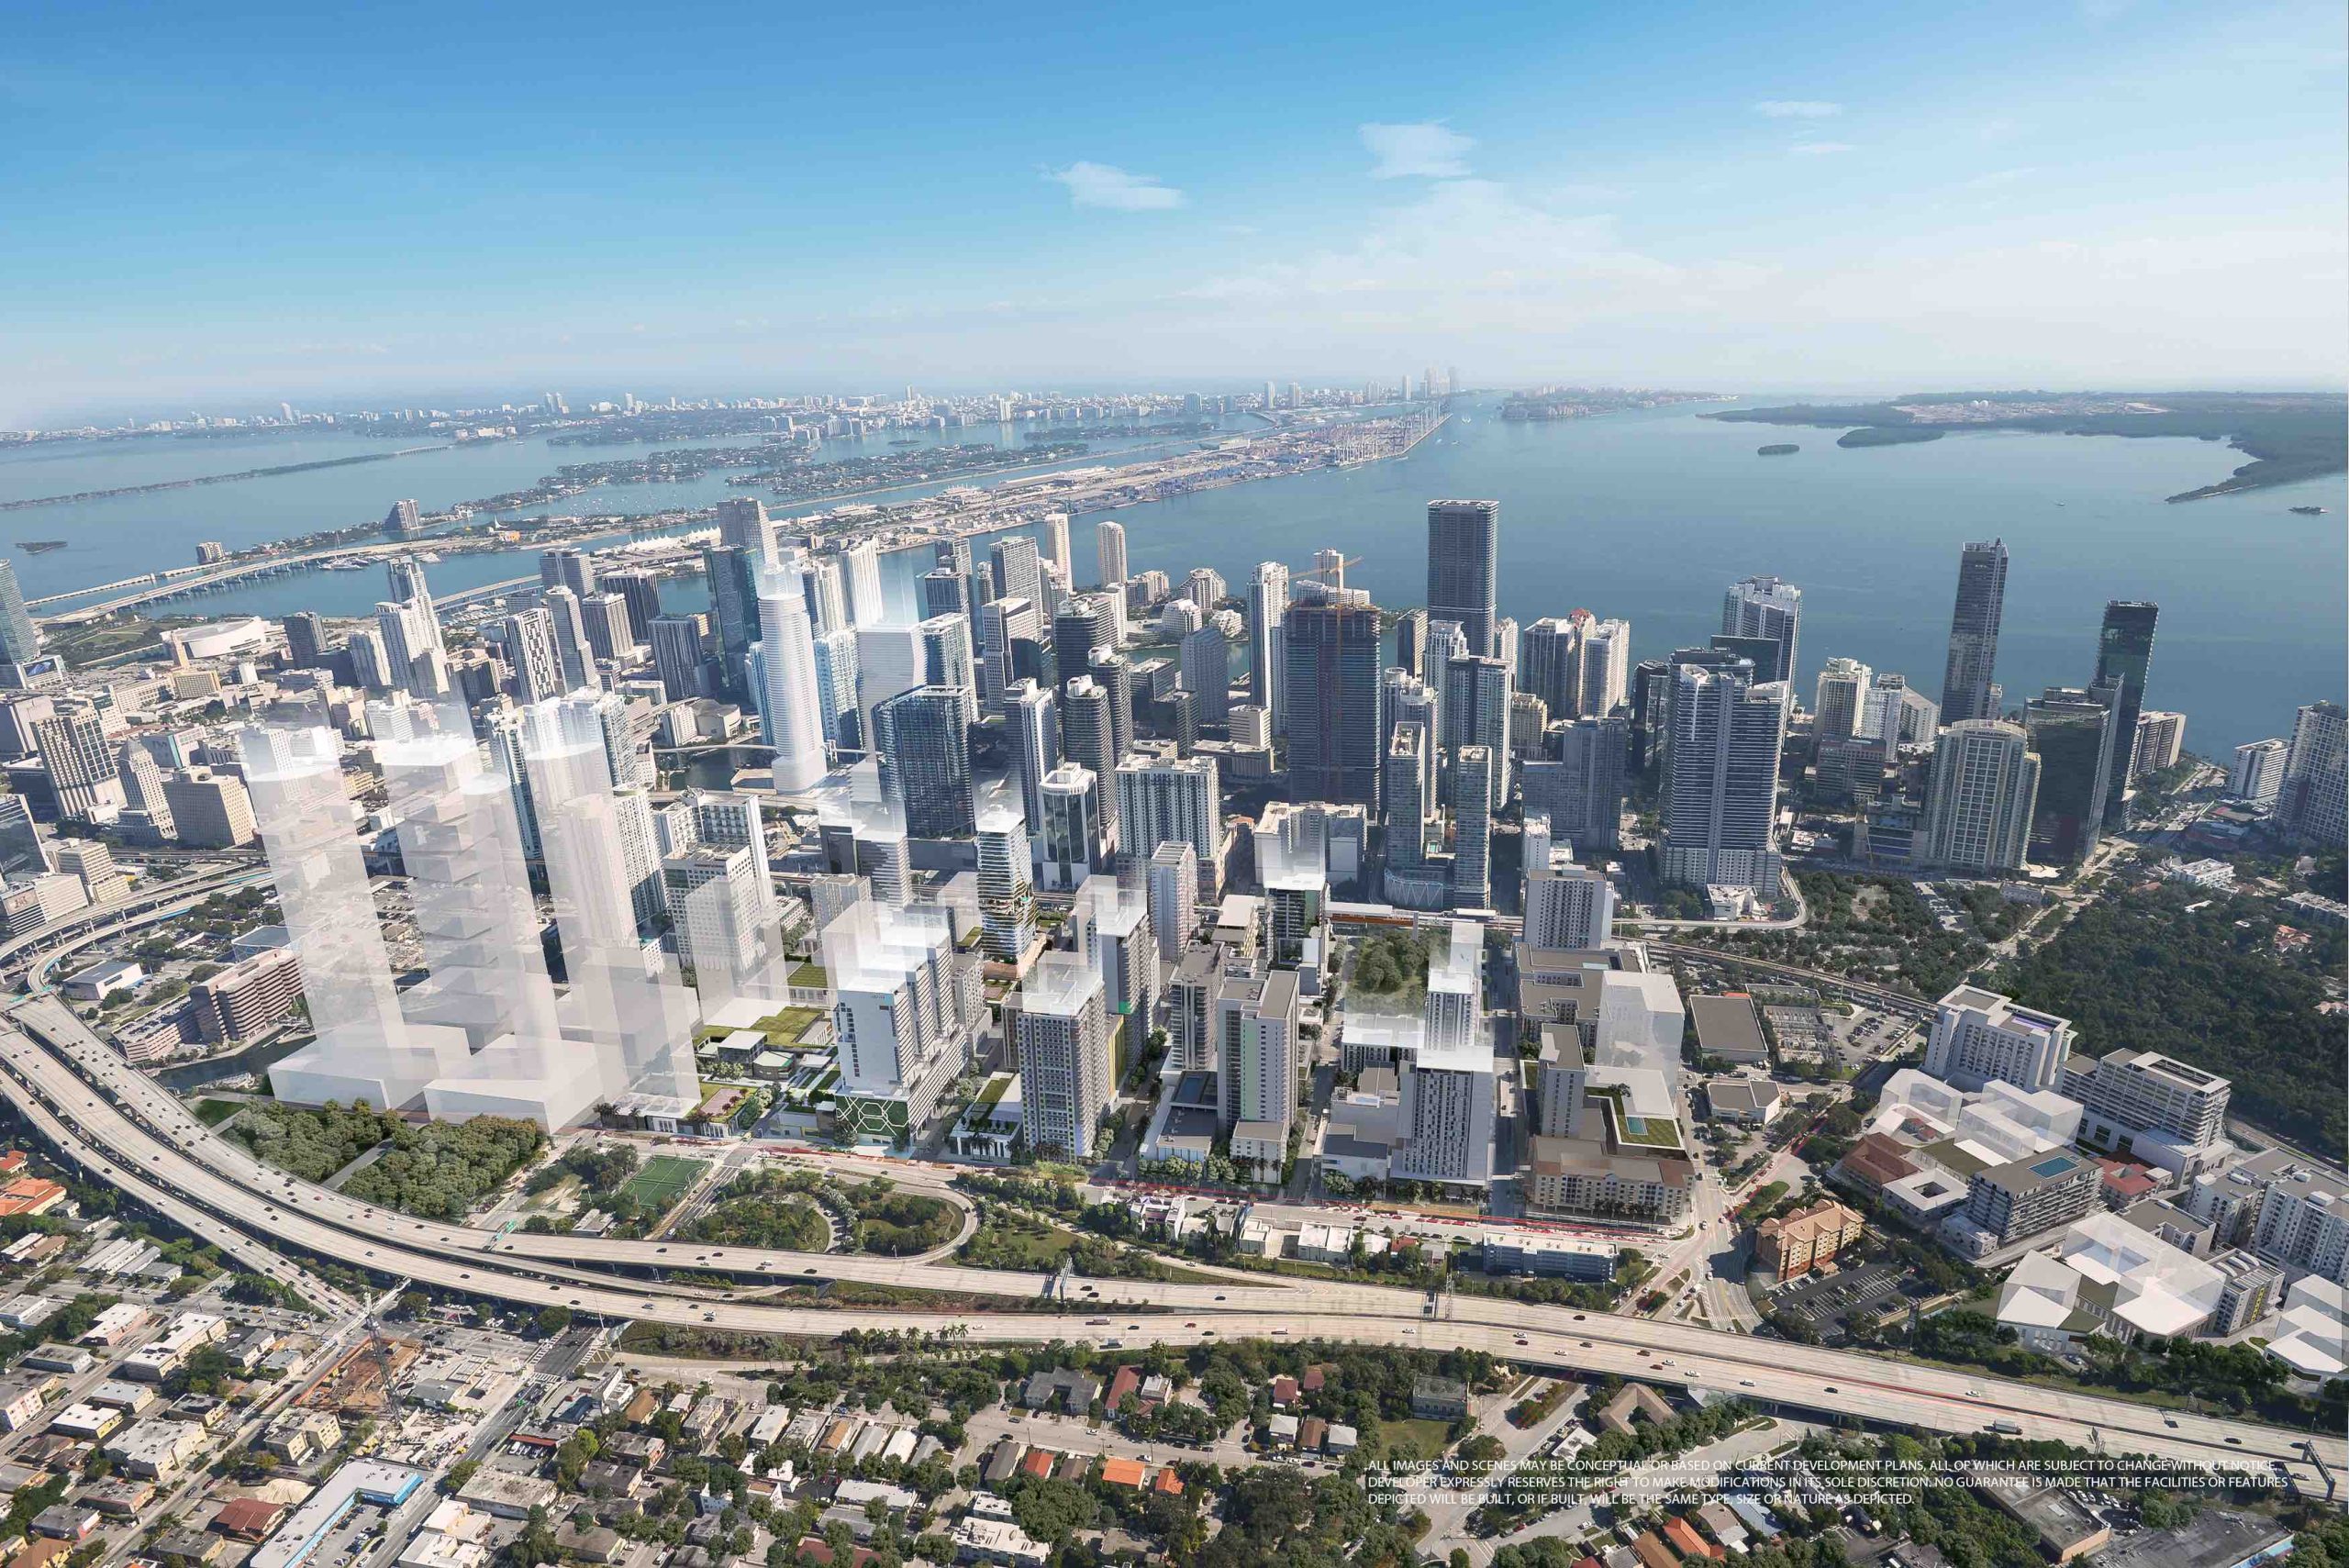 DEVELOPER HAS BIG PLANS FOR TOWERS, HOTELS, APARTMENTS NEAR DOWNTOWN MIAMI